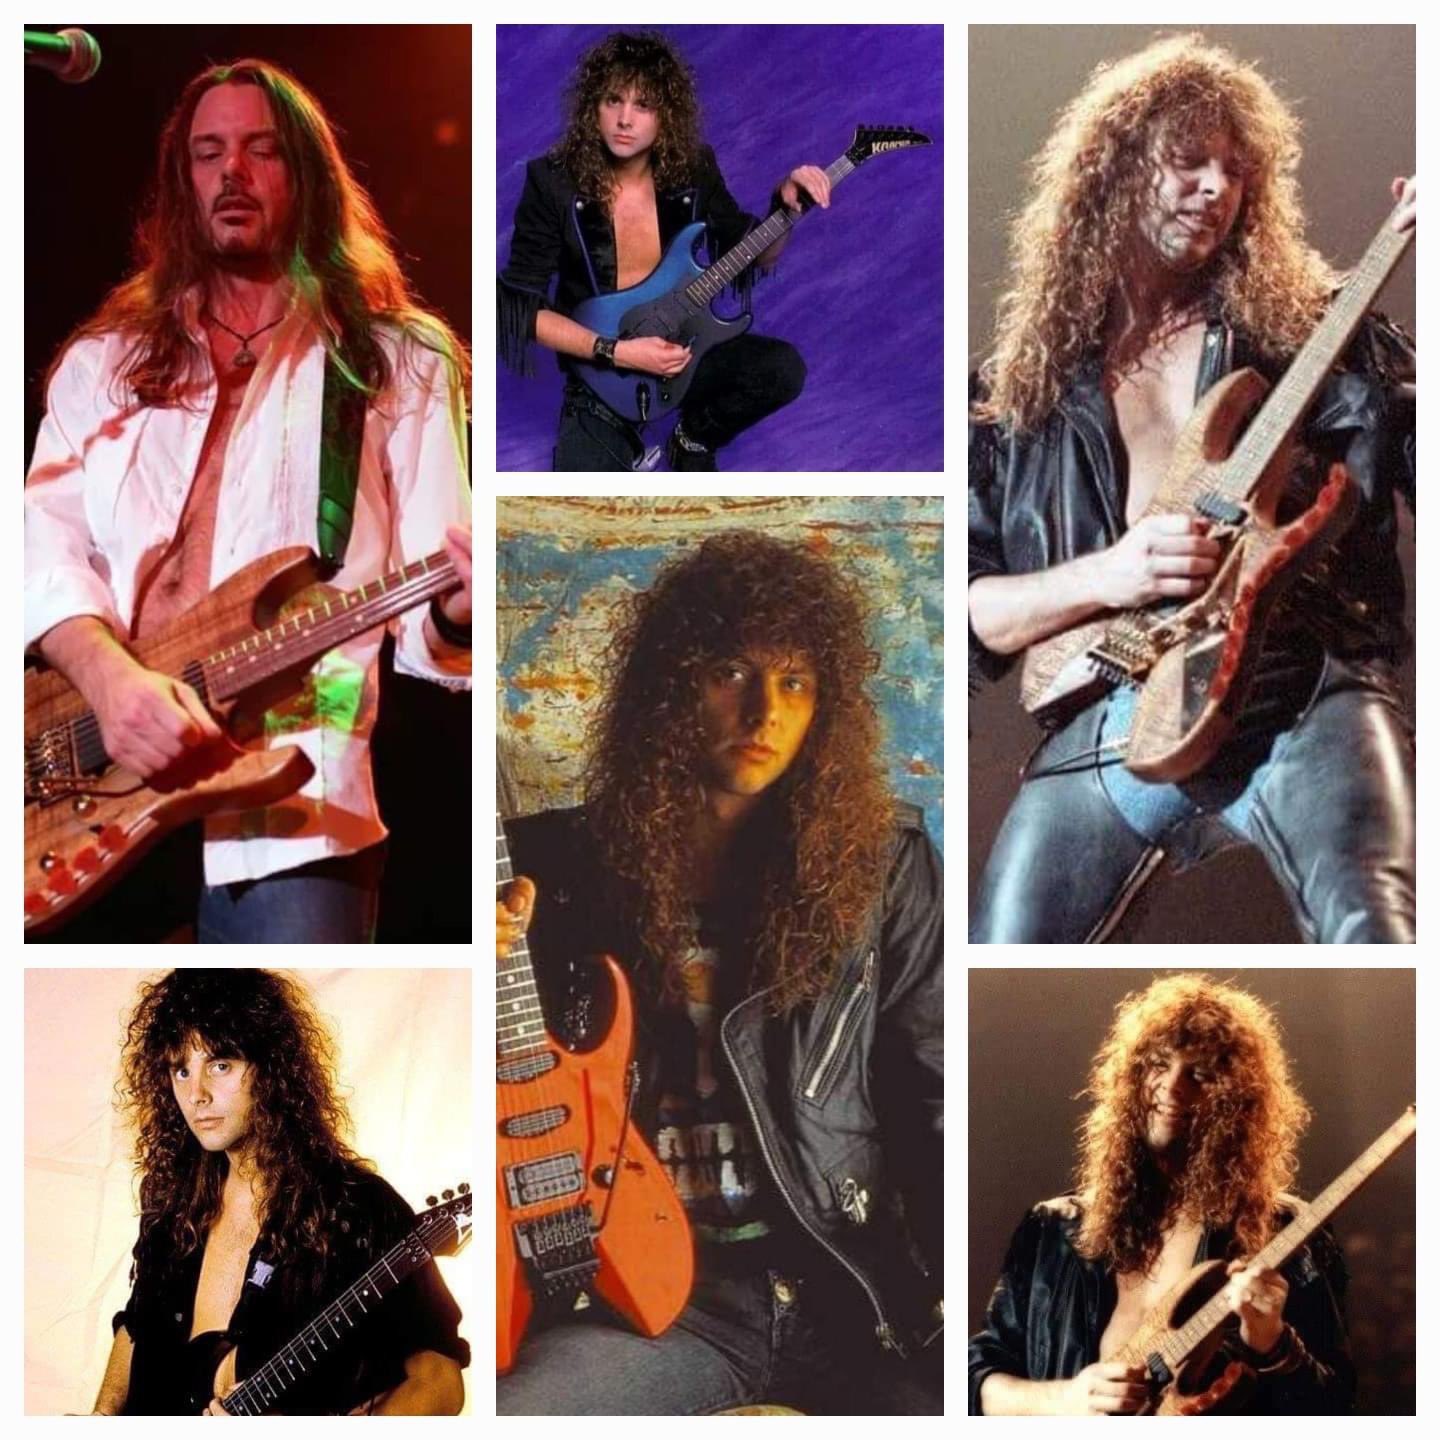 It s a Metal Birthday Celebration! Happy Birthday to one of my guitar hero s the Great Reb Beach! 